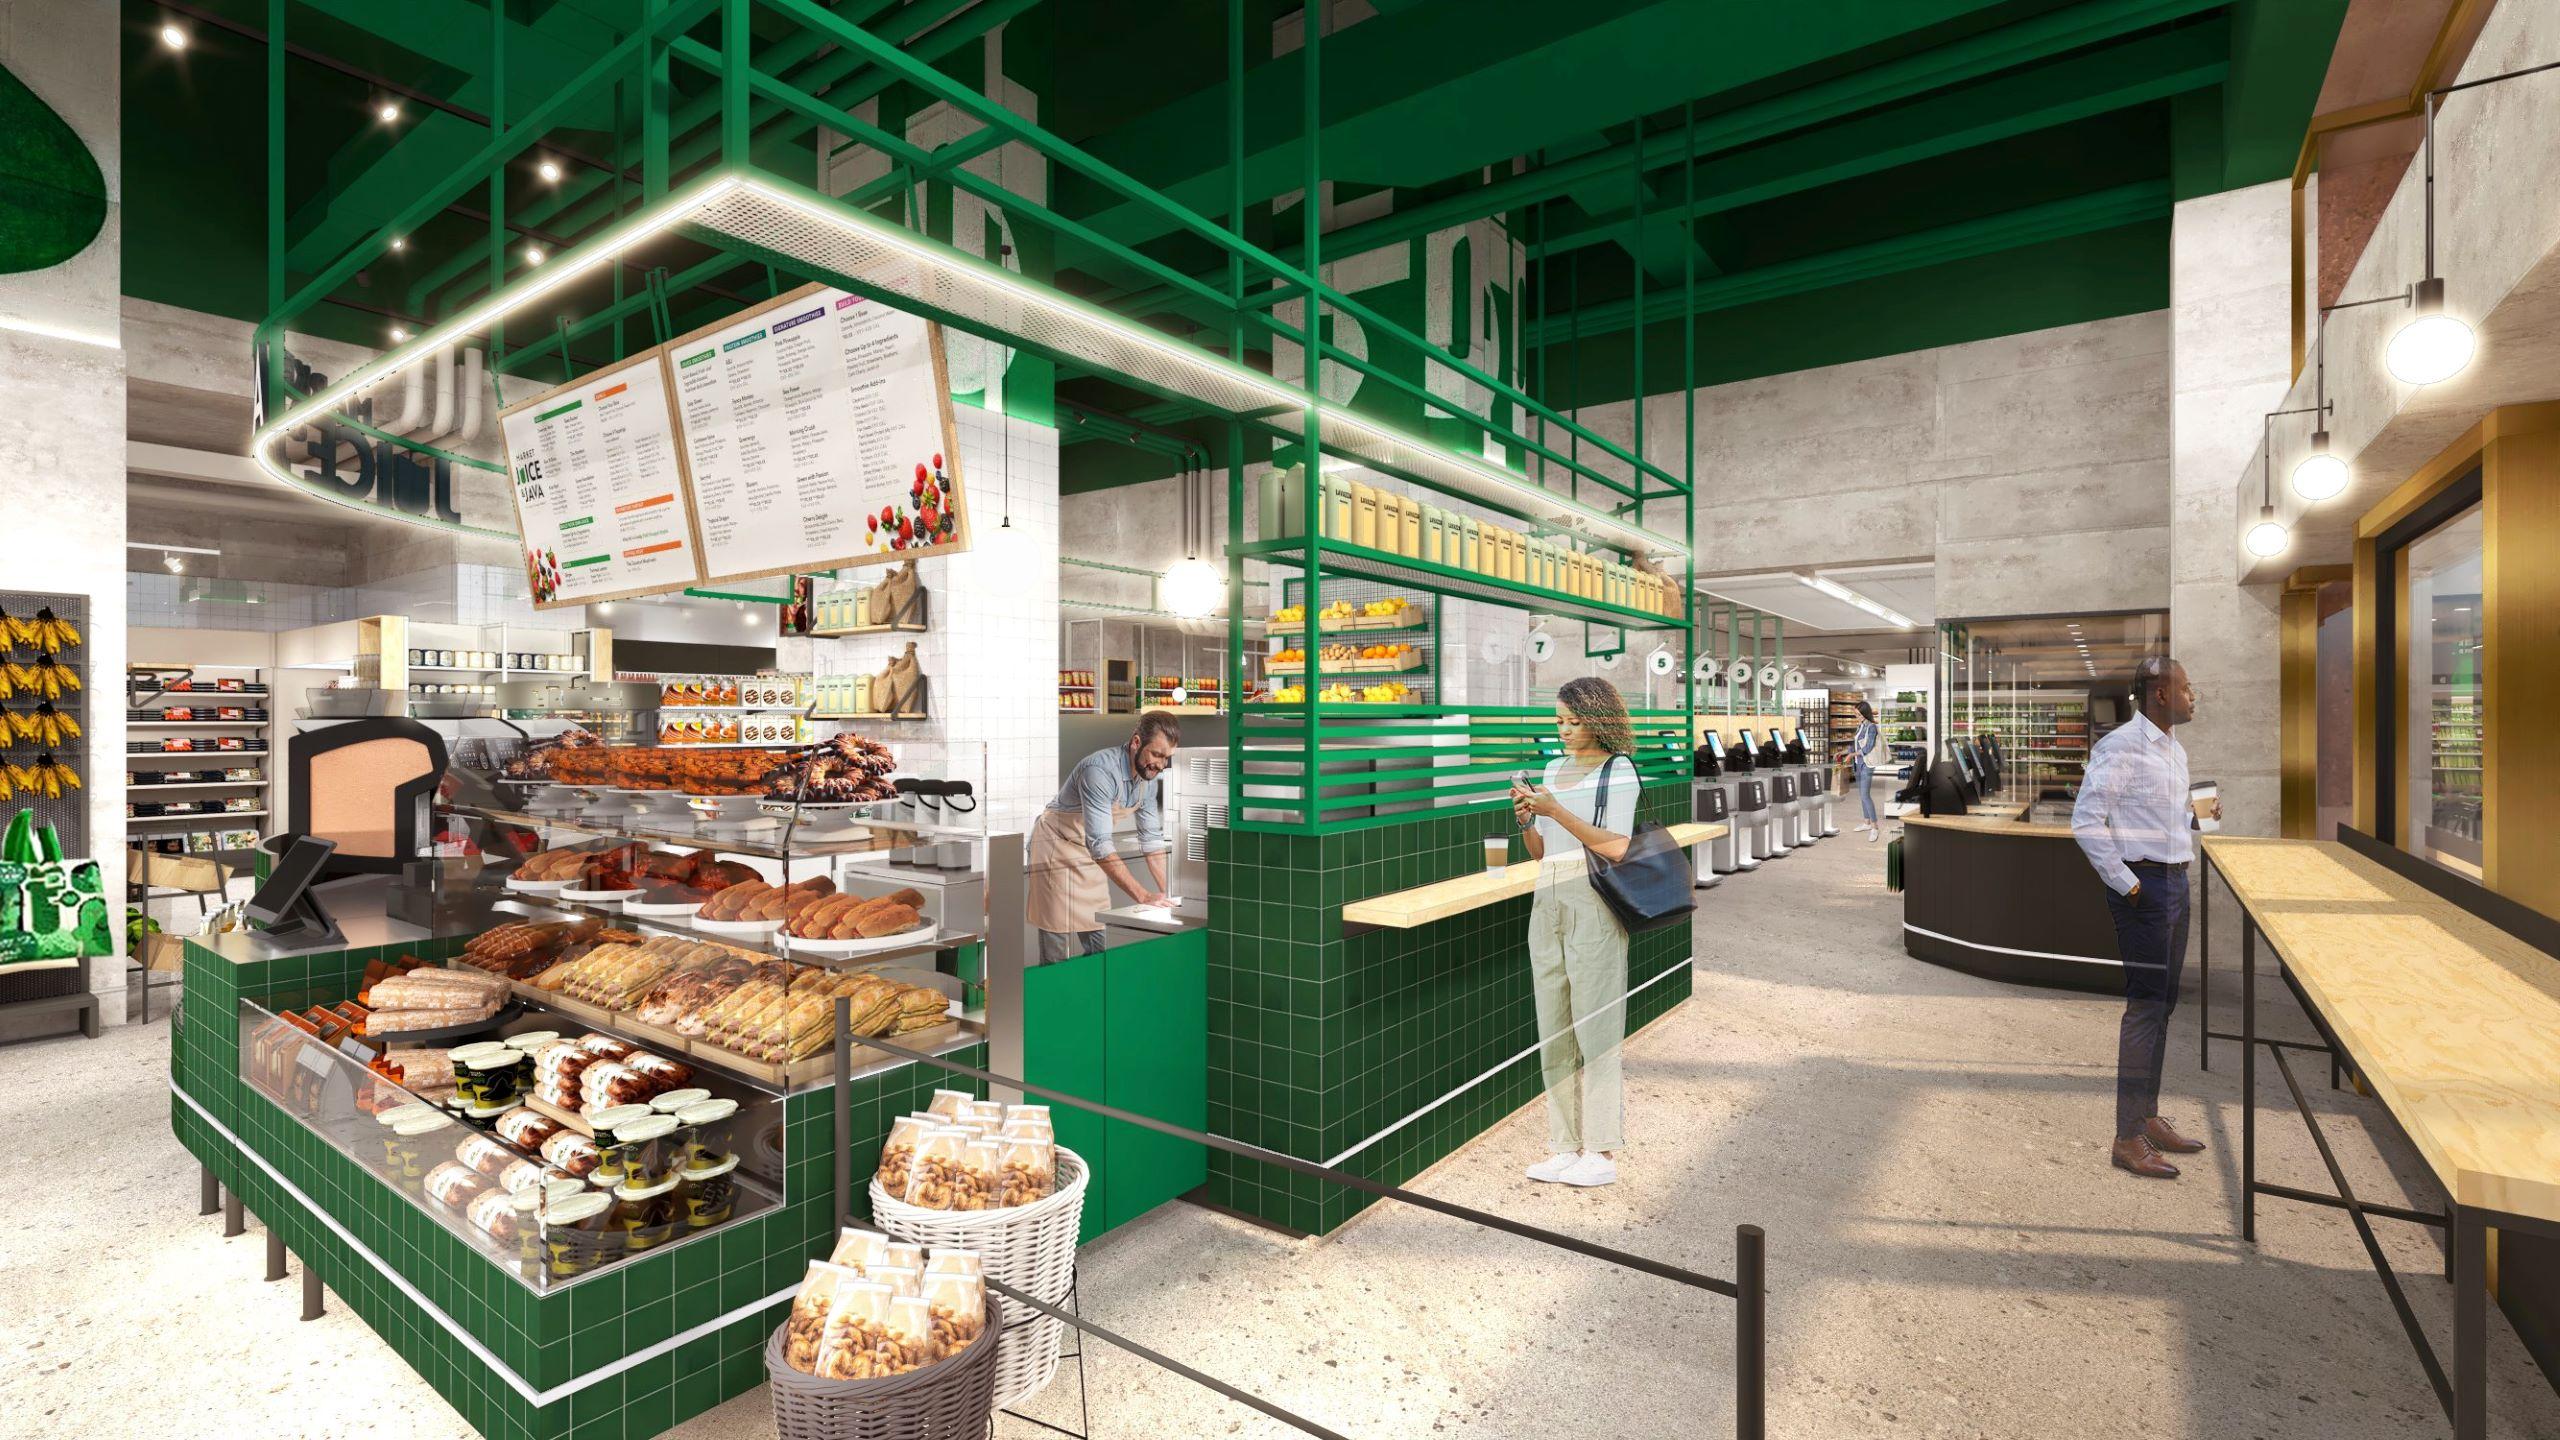 Whole Foods Market to Open Compact Stores as Part of Continued Growth